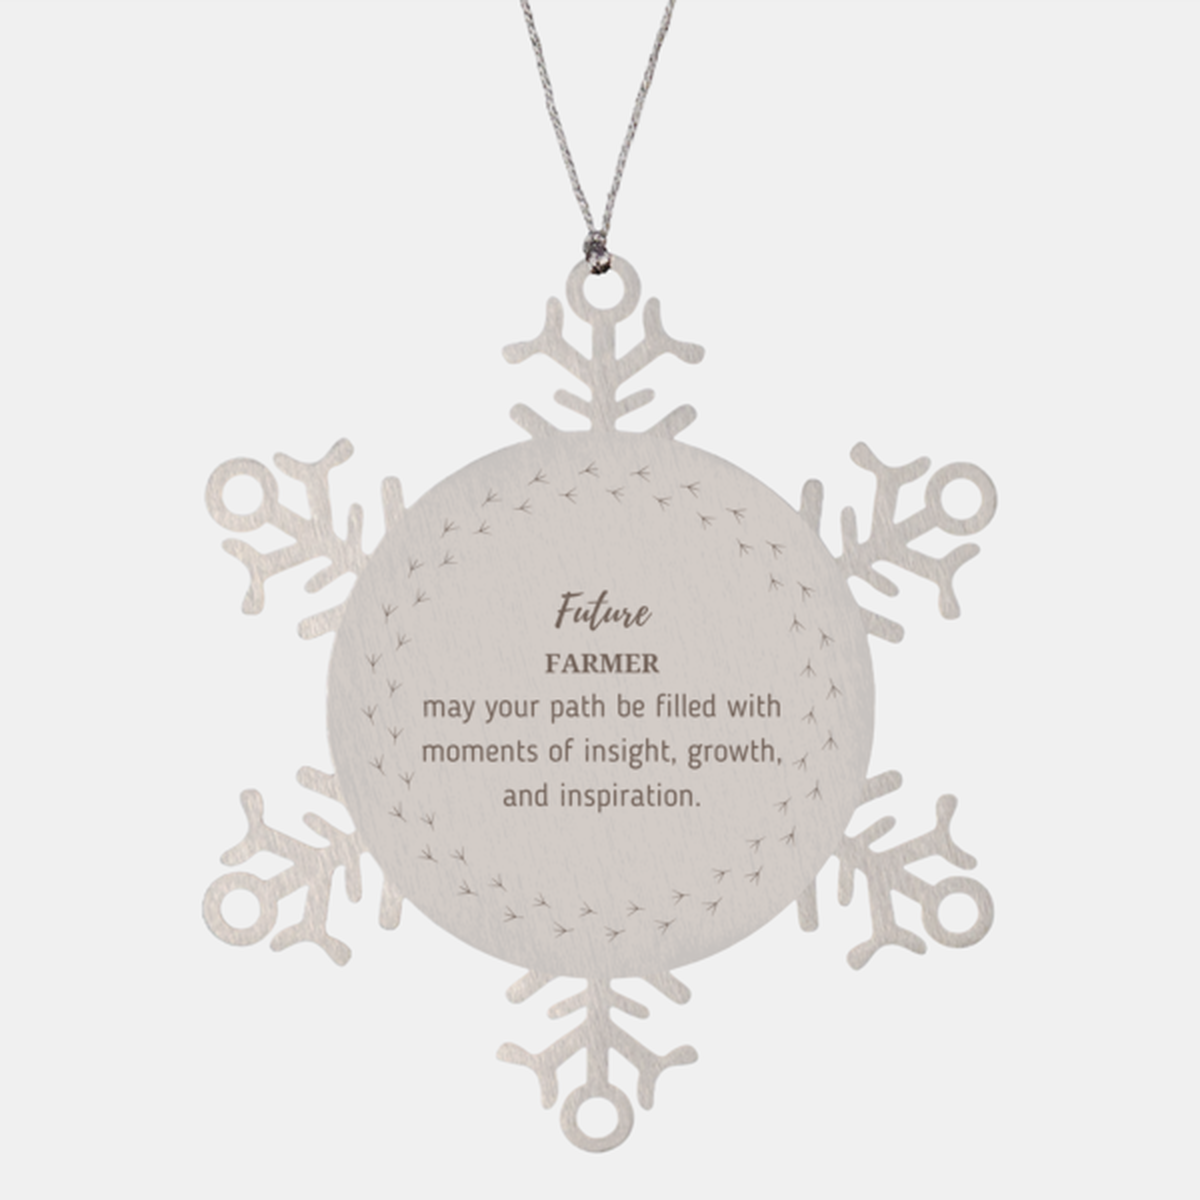 Future Farmer Gifts, May your path be filled with moments of insight, Graduation Gifts for New Farmer, Christmas Unique Snowflake Ornament For Men, Women, Friends